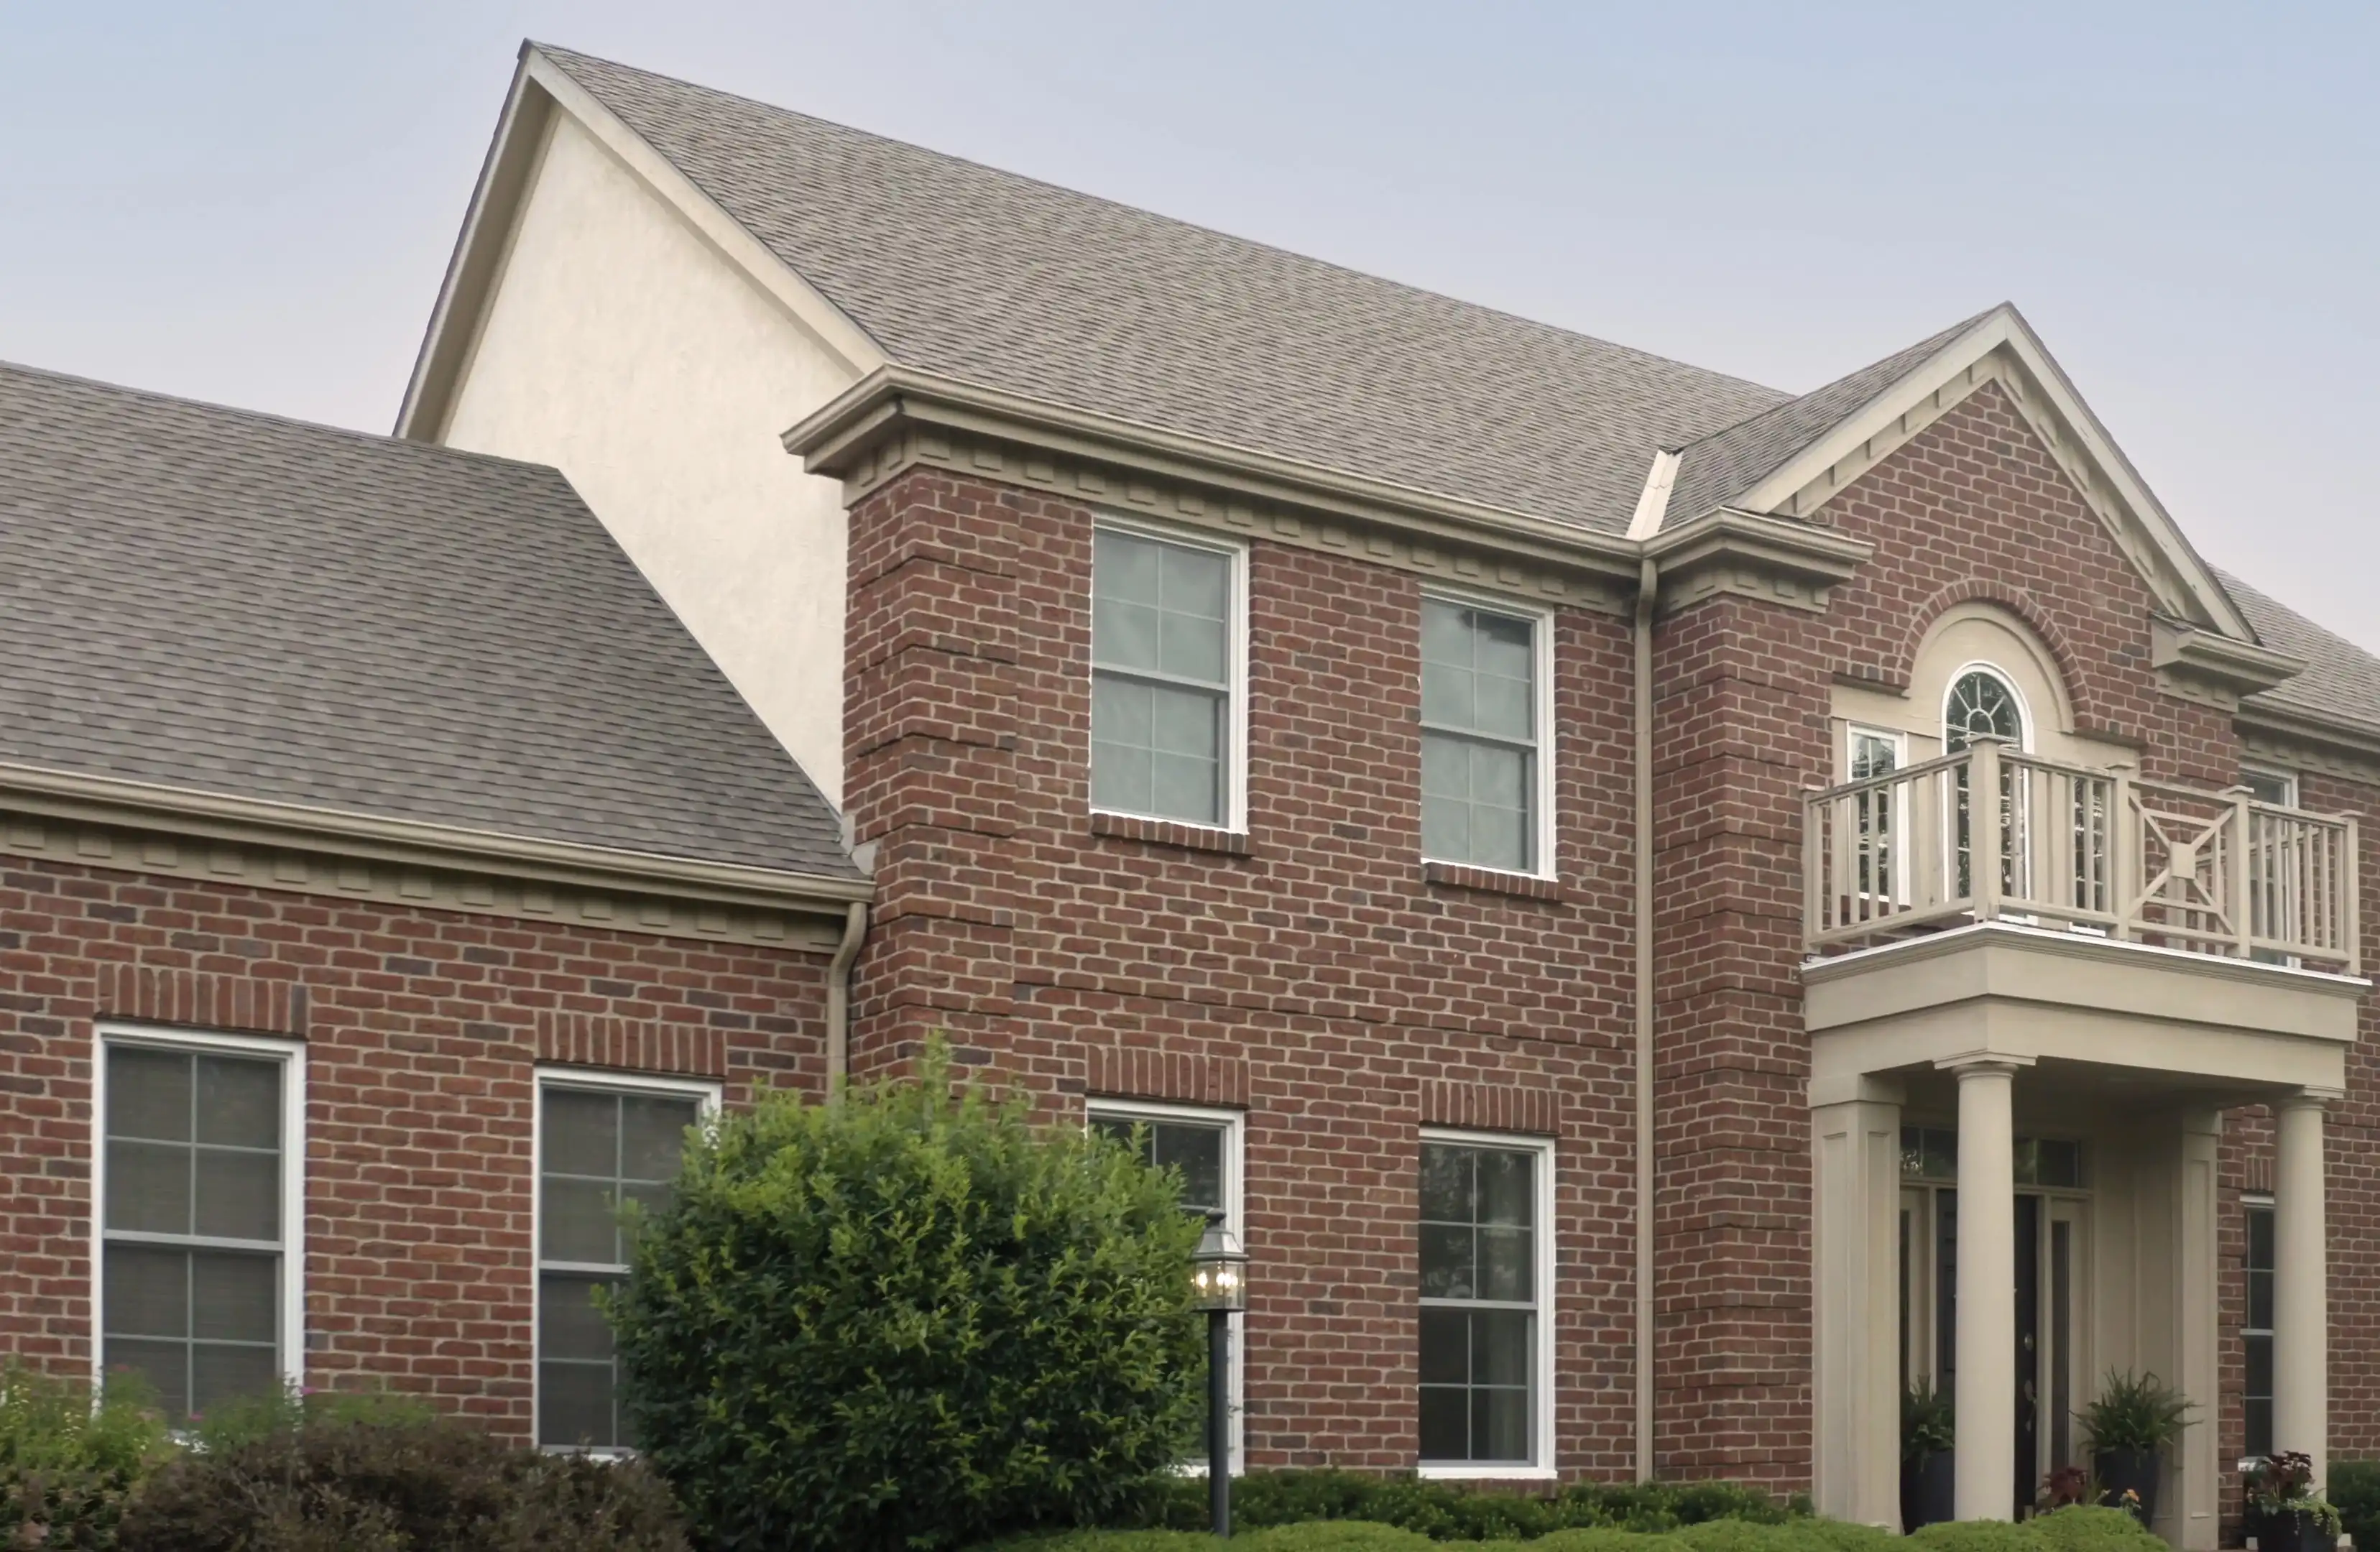 Exterior view of a brick home with Marvin Replacement Double Hung Windows.